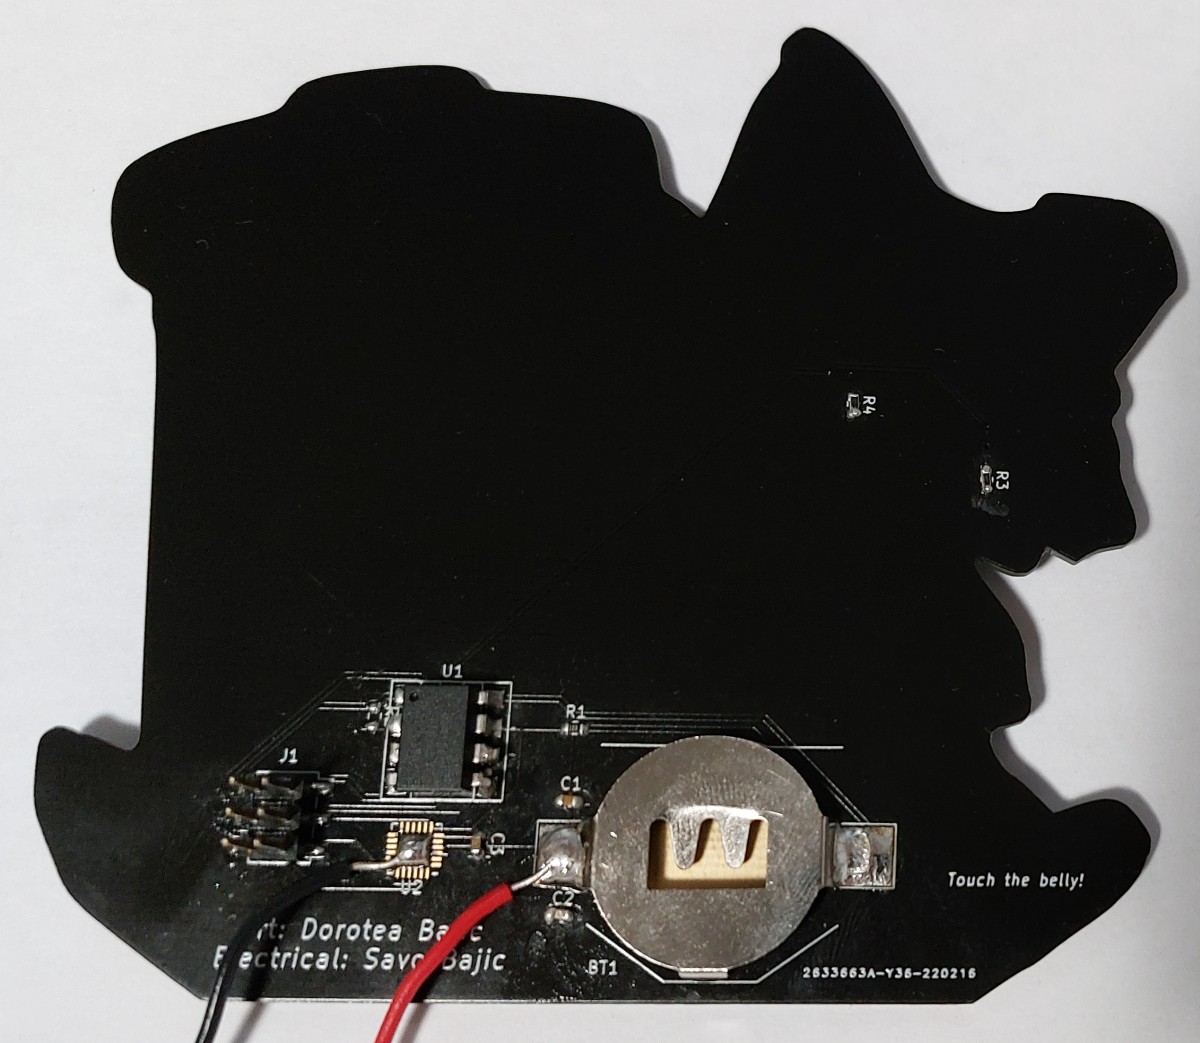 The assembled circuitry on the rear of the raccoon. Note: the wires were used for power delivery during programming.